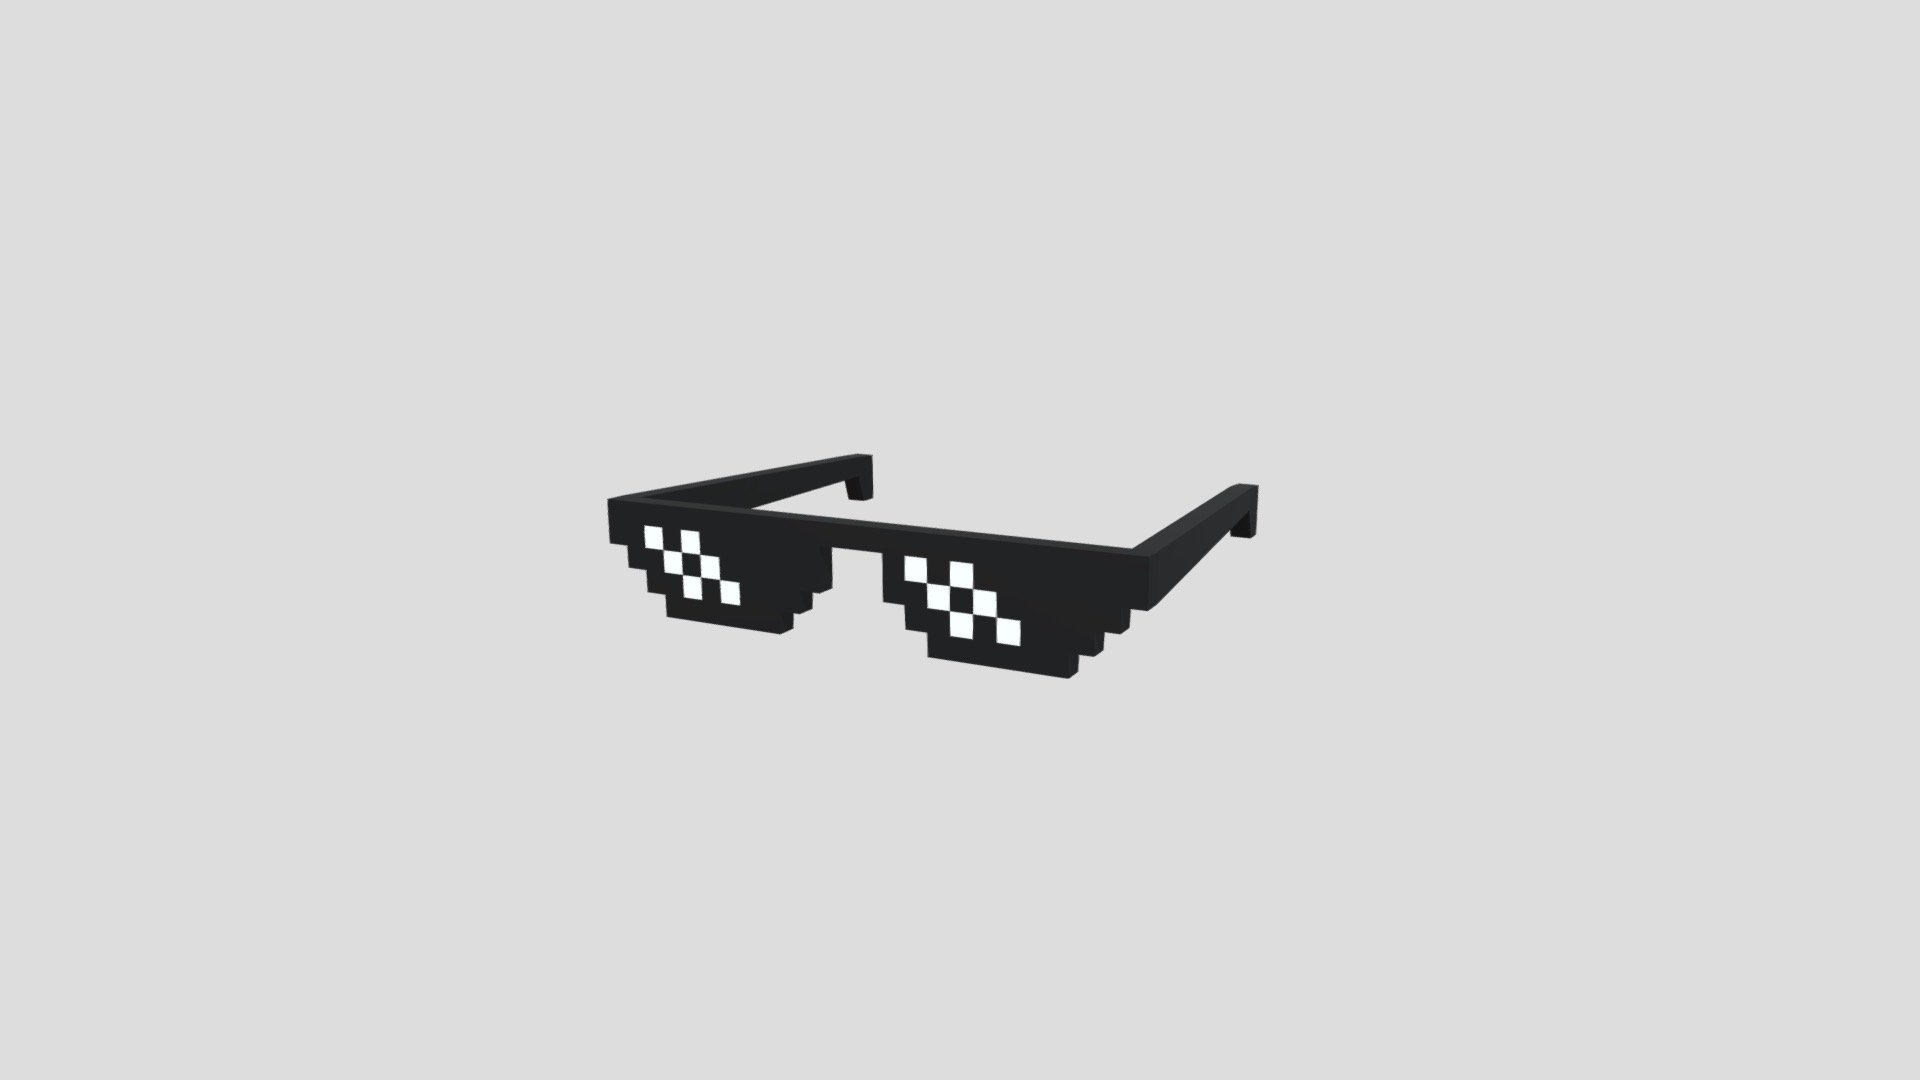 Textures: 32 x 32, Two colors on texture: Black and white.

Materials: 1 - Pixel Sunglasses

Flat shaded.

Mirrored.

Subdivision Level: 0

Origin located on middle-center.

Polygons: 900

Vertices: 296

Formats: Fbx, Obj, Stl, Dae.

I hope you enjoy the model! - Pixel Sunglasses - Buy Royalty Free 3D model by Ed+ (@EDplus) 3d model